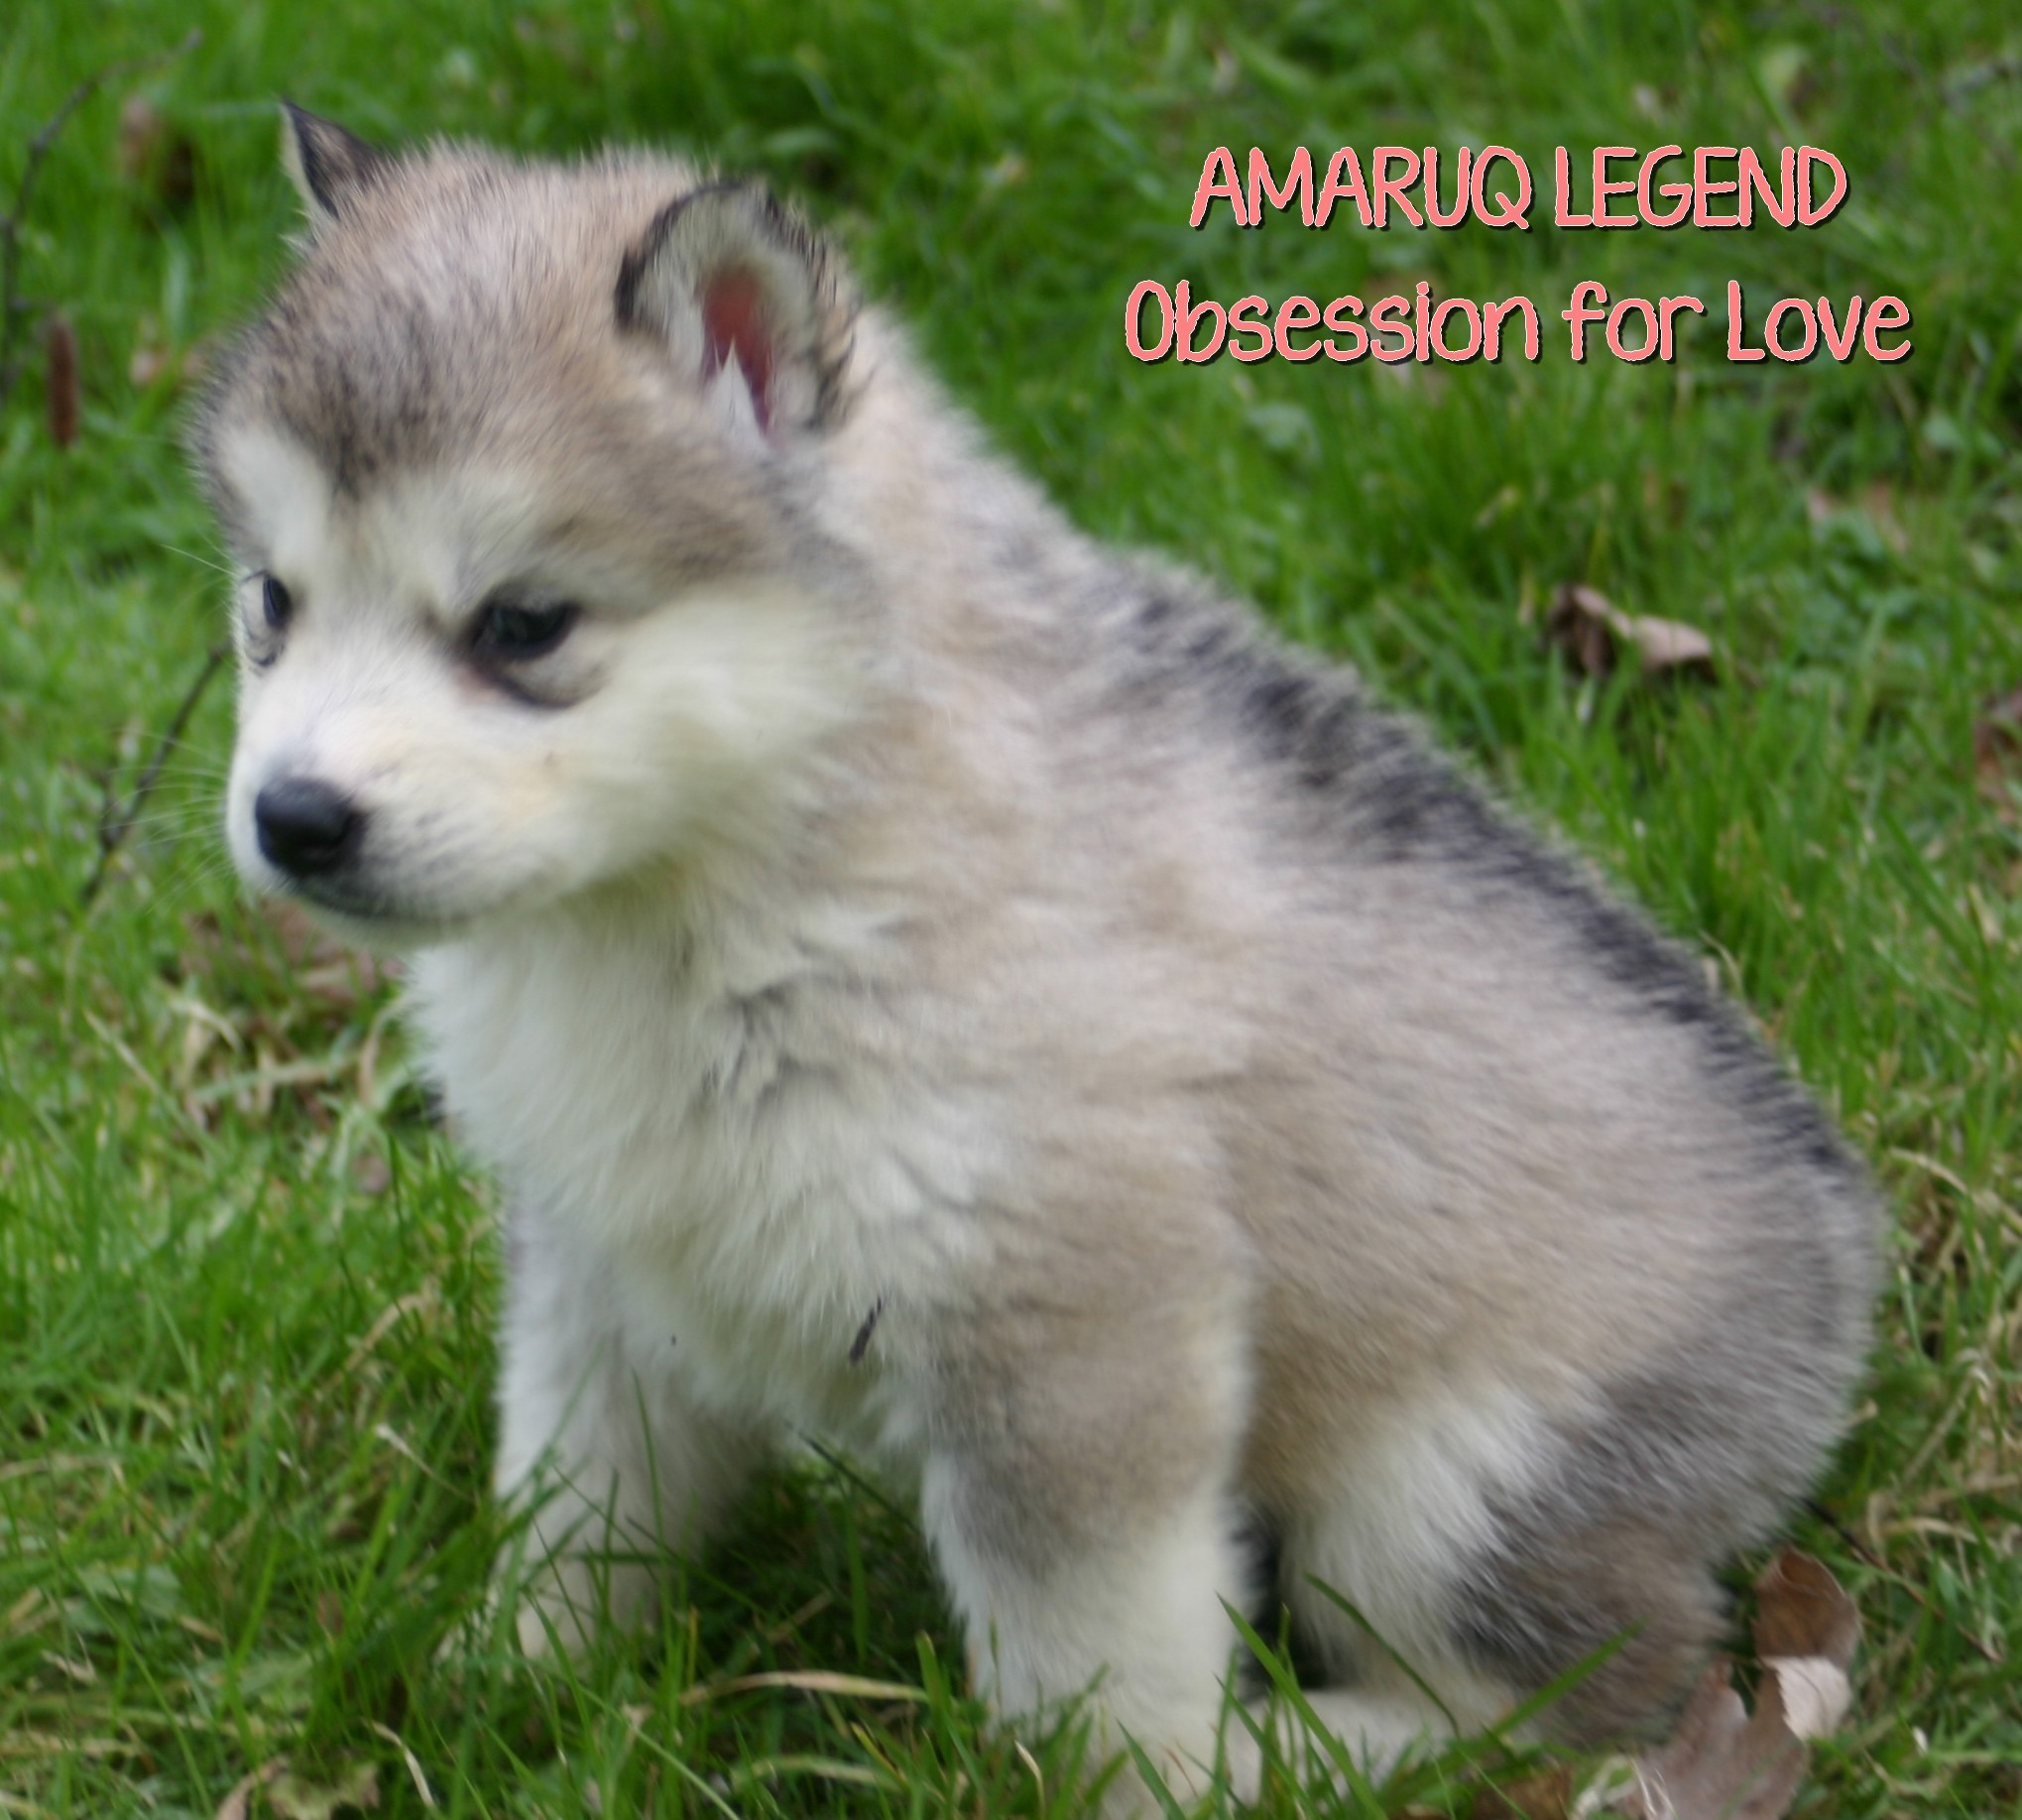 Amaruq Legend Obsession for love